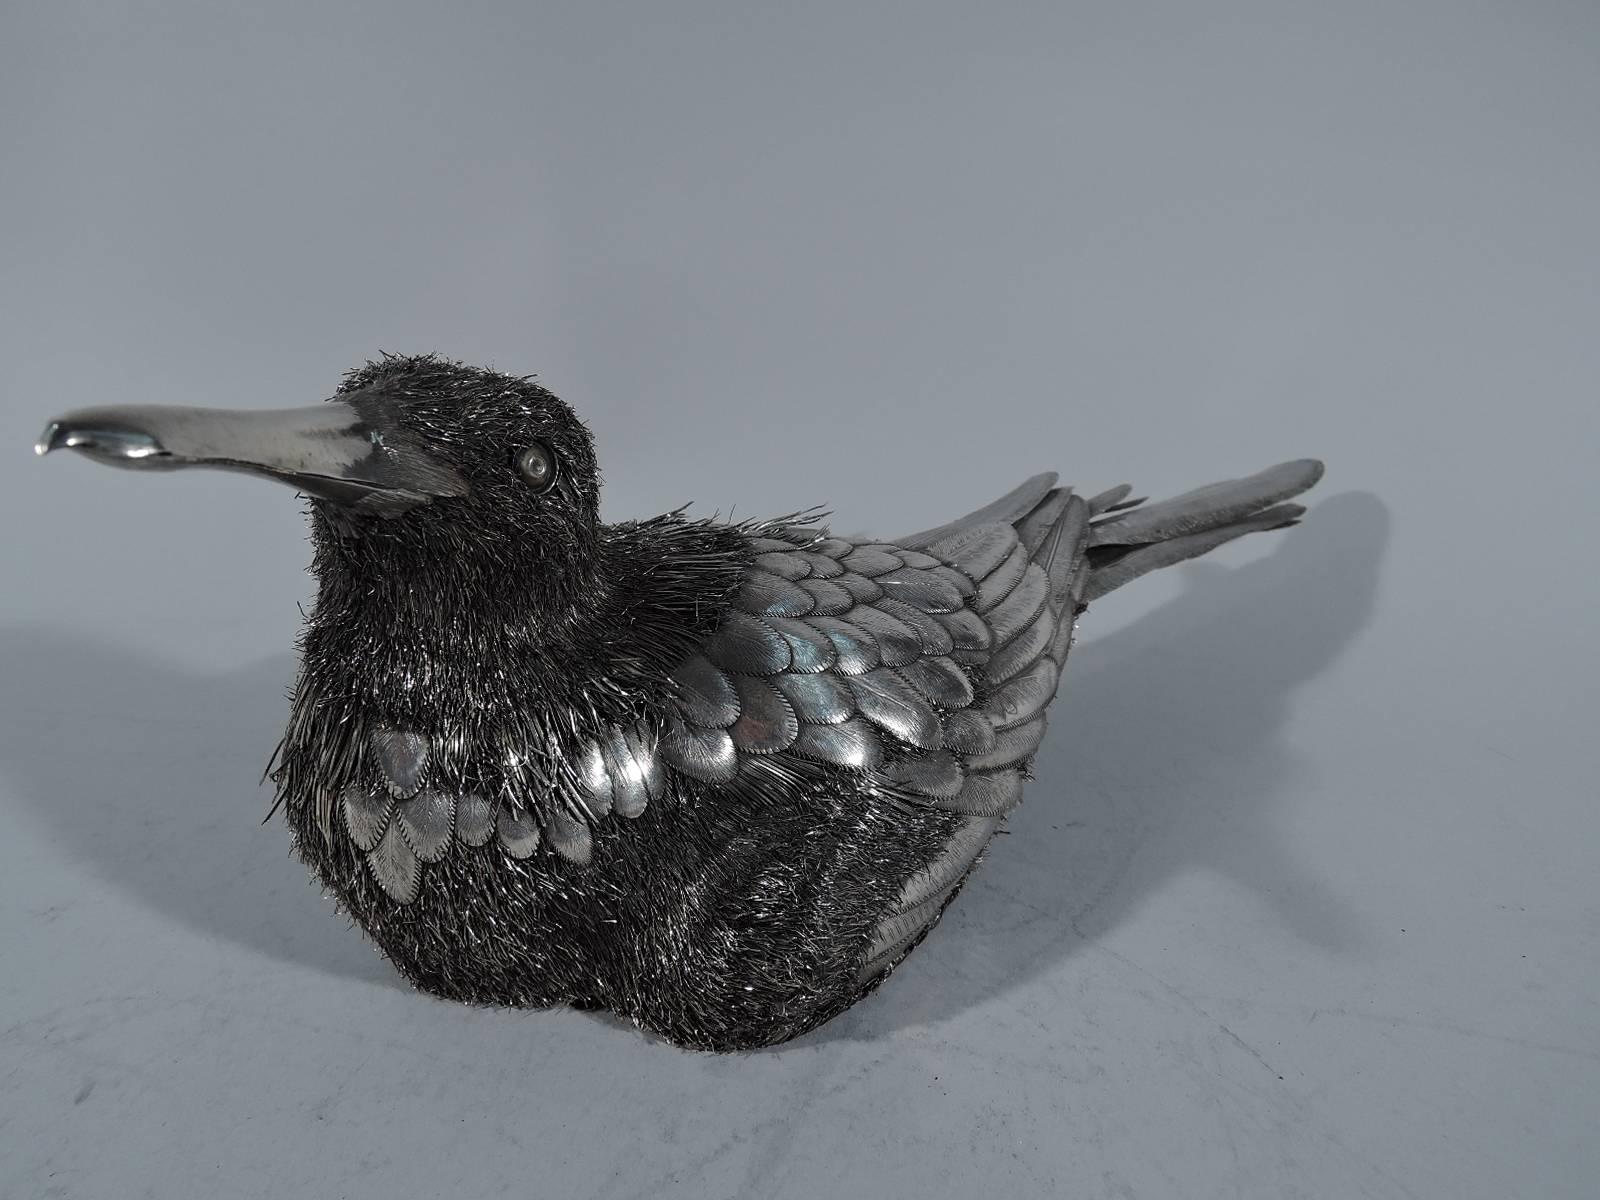 Nesting duck figure in 800 silver. Made by Mario Buccellati in Milan, circa 1930s. The bird is in full tucked-down mode with wings close to body. Engraved and overlapping feathers on body and tail as well as bristly wire feathers on neck, head, and